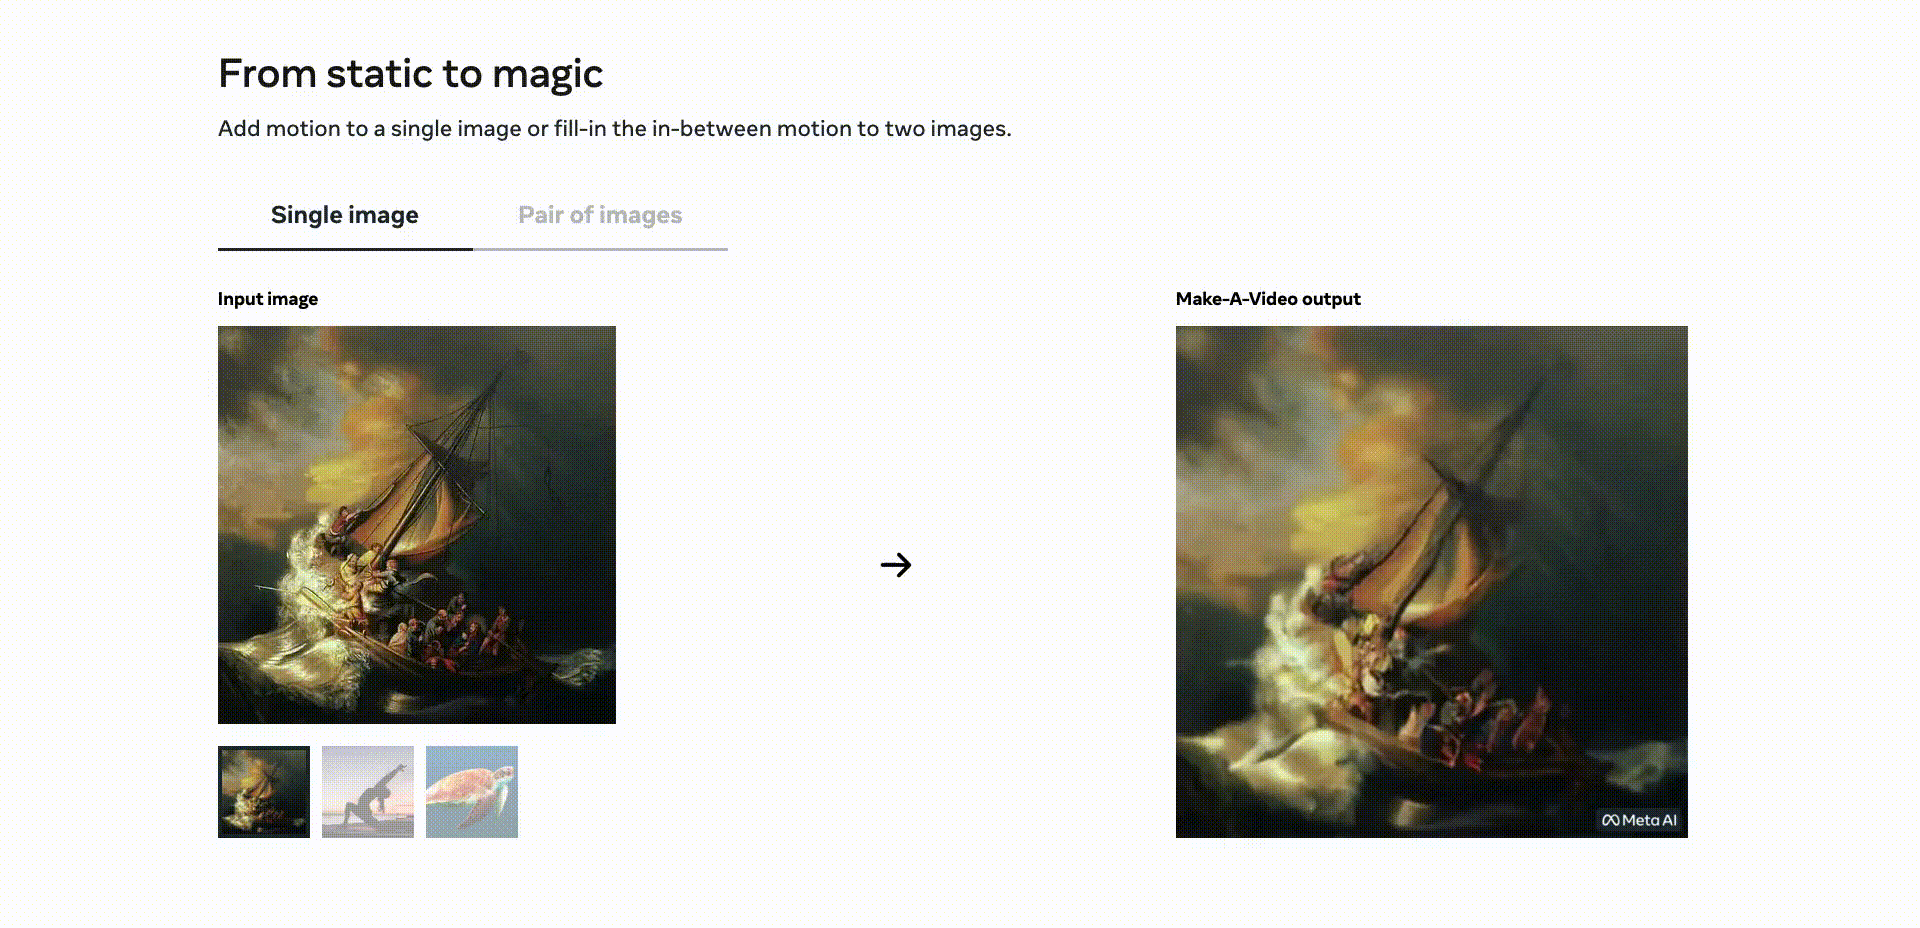 make-a-video from static to magic